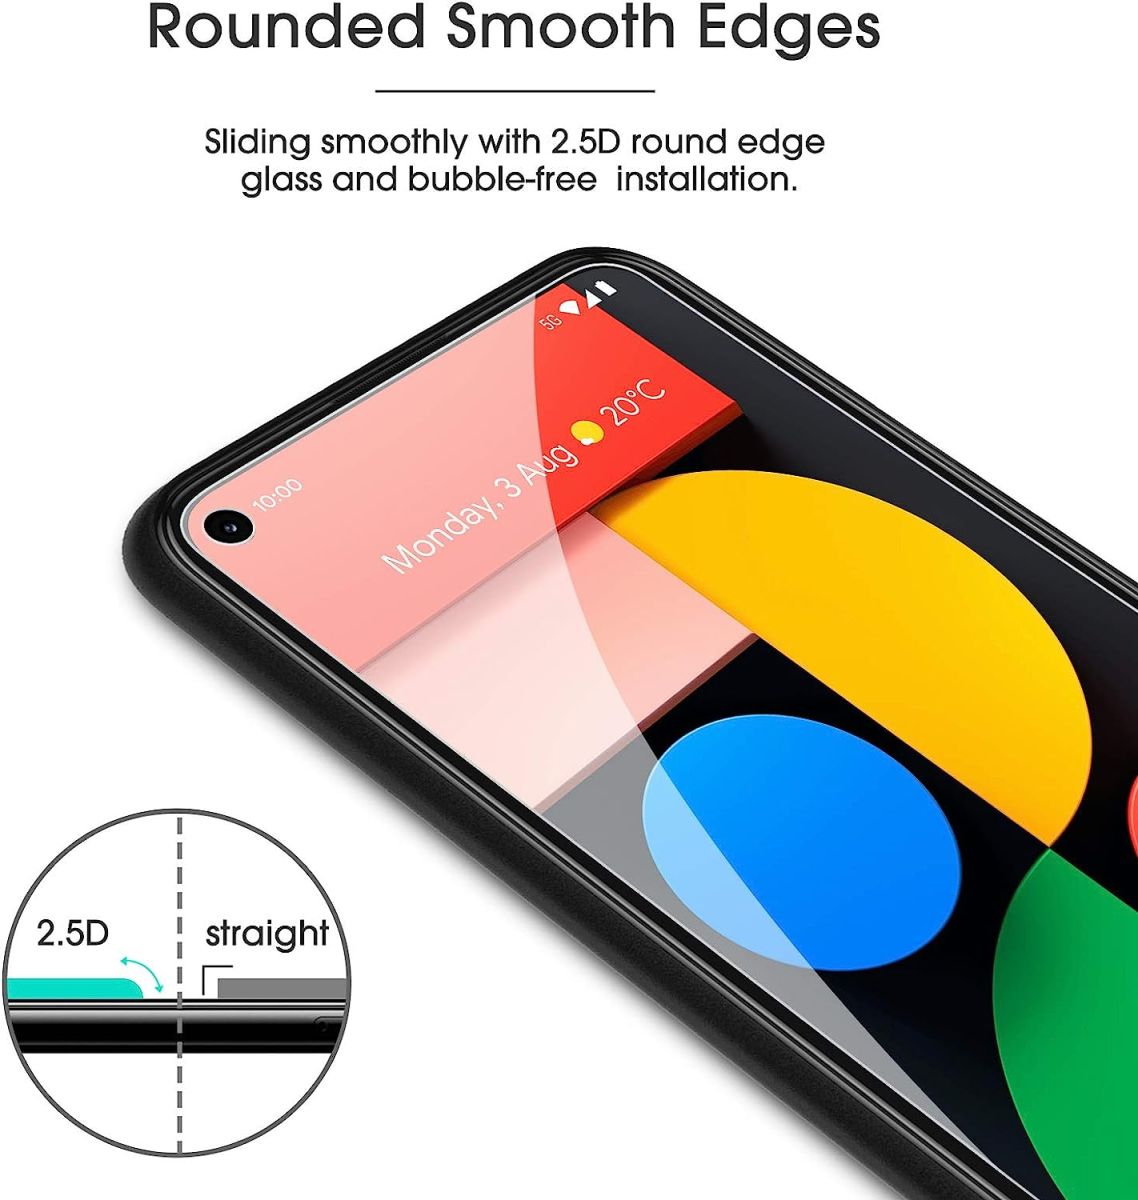 OMOTON [3 Pack] Screen Protector for Google Pixel 5 - Tempered Glass/Alignment Frame/Anti Scratch Screen Protector for Google Pixel 5